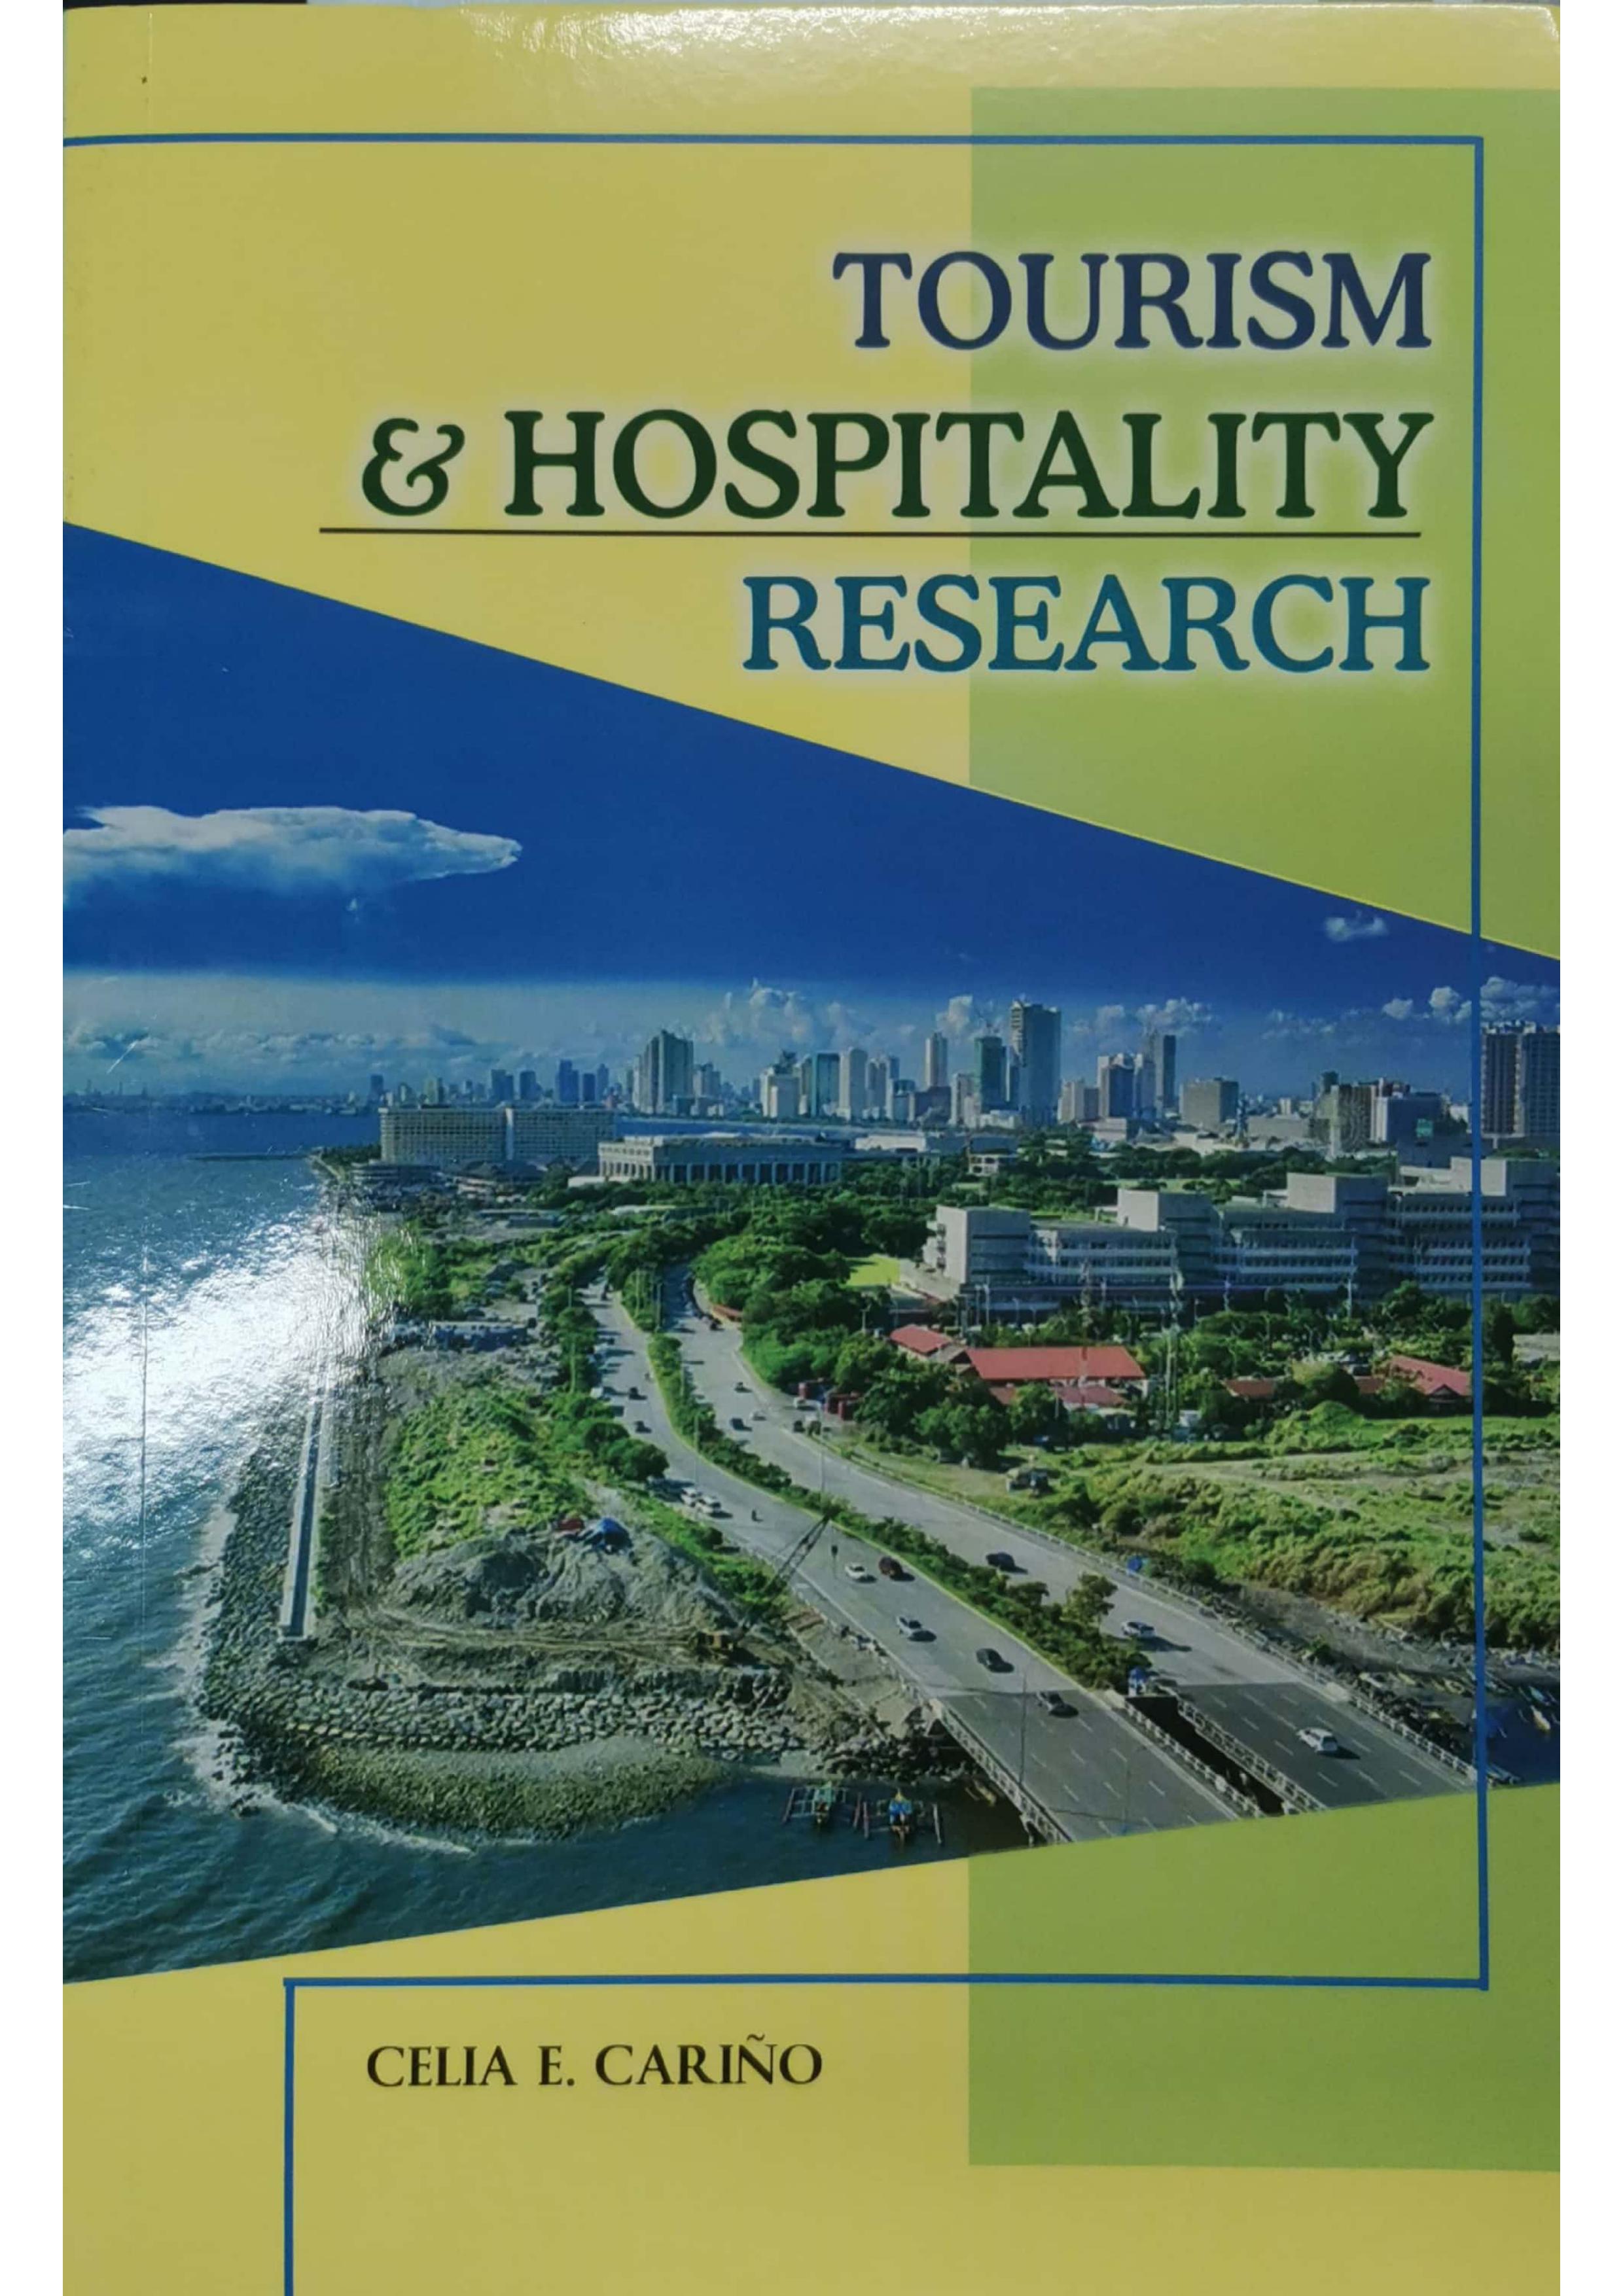 research titles tourism